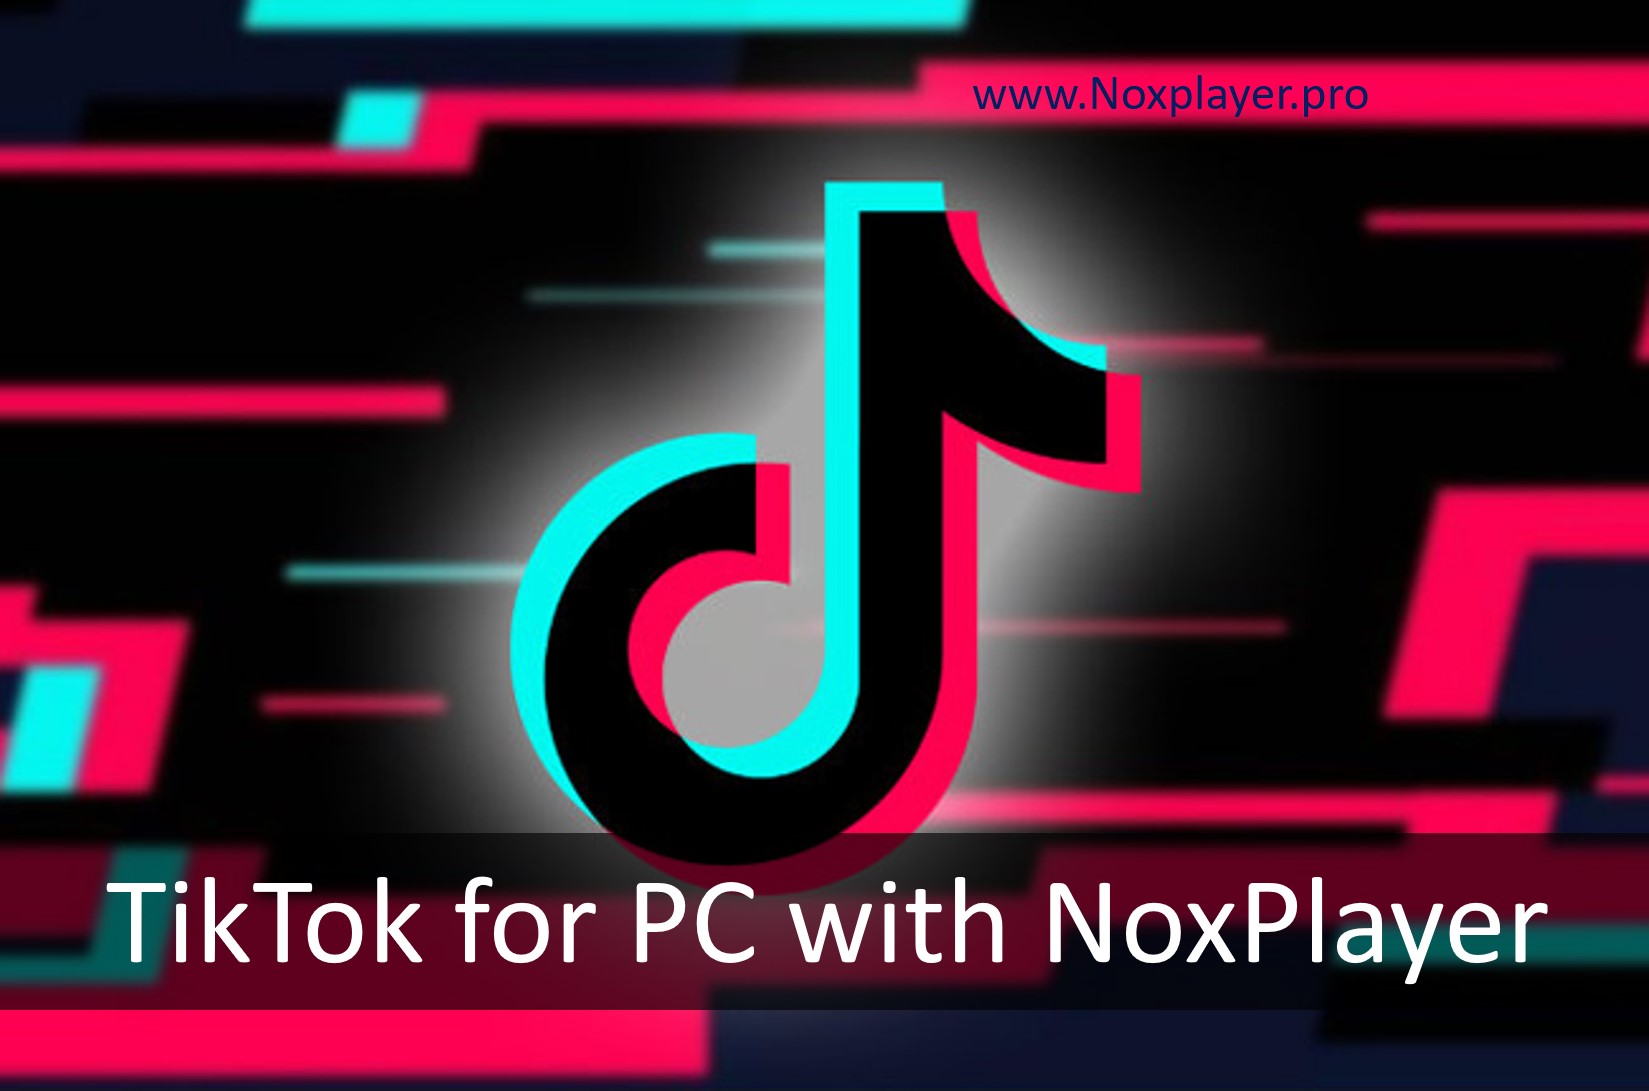 Tiktok for PC with NoxPlayer